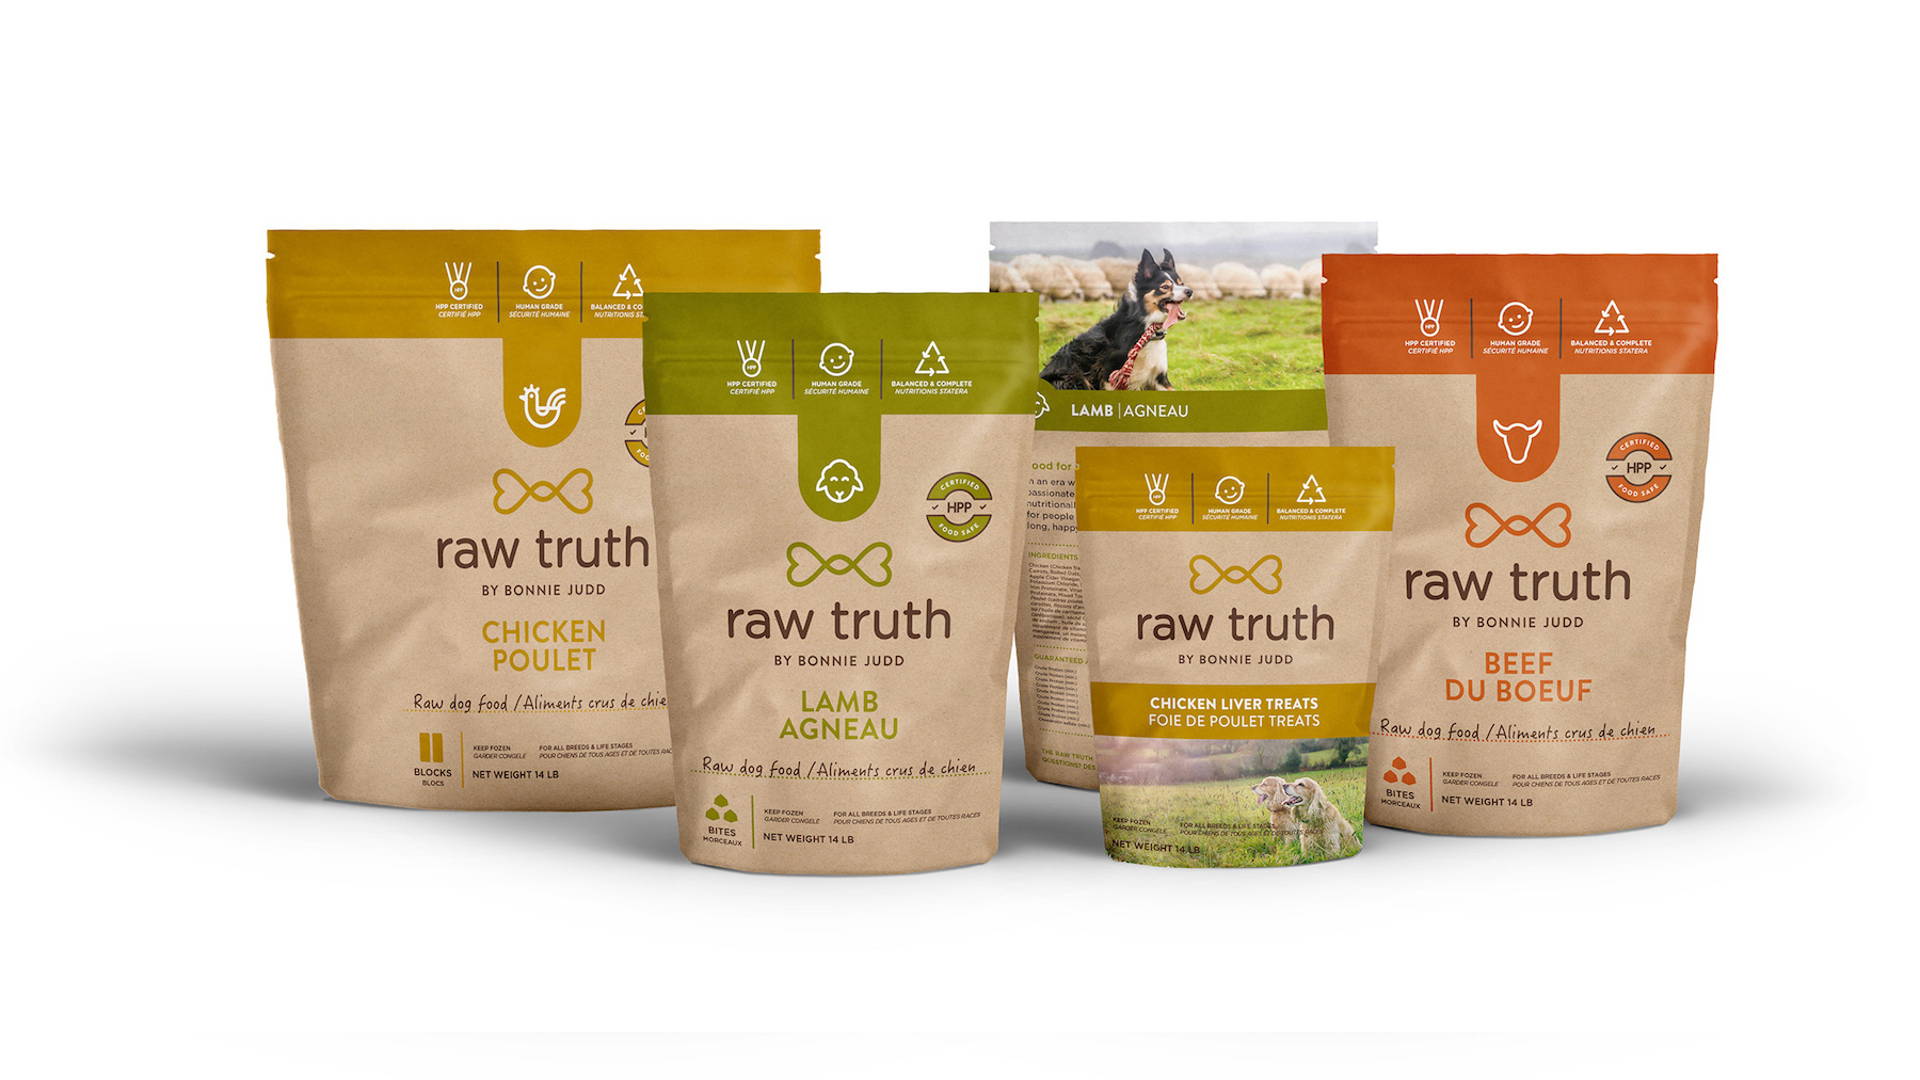 Featured image for This Dog Food’s Natural Values Shine in its Packaging